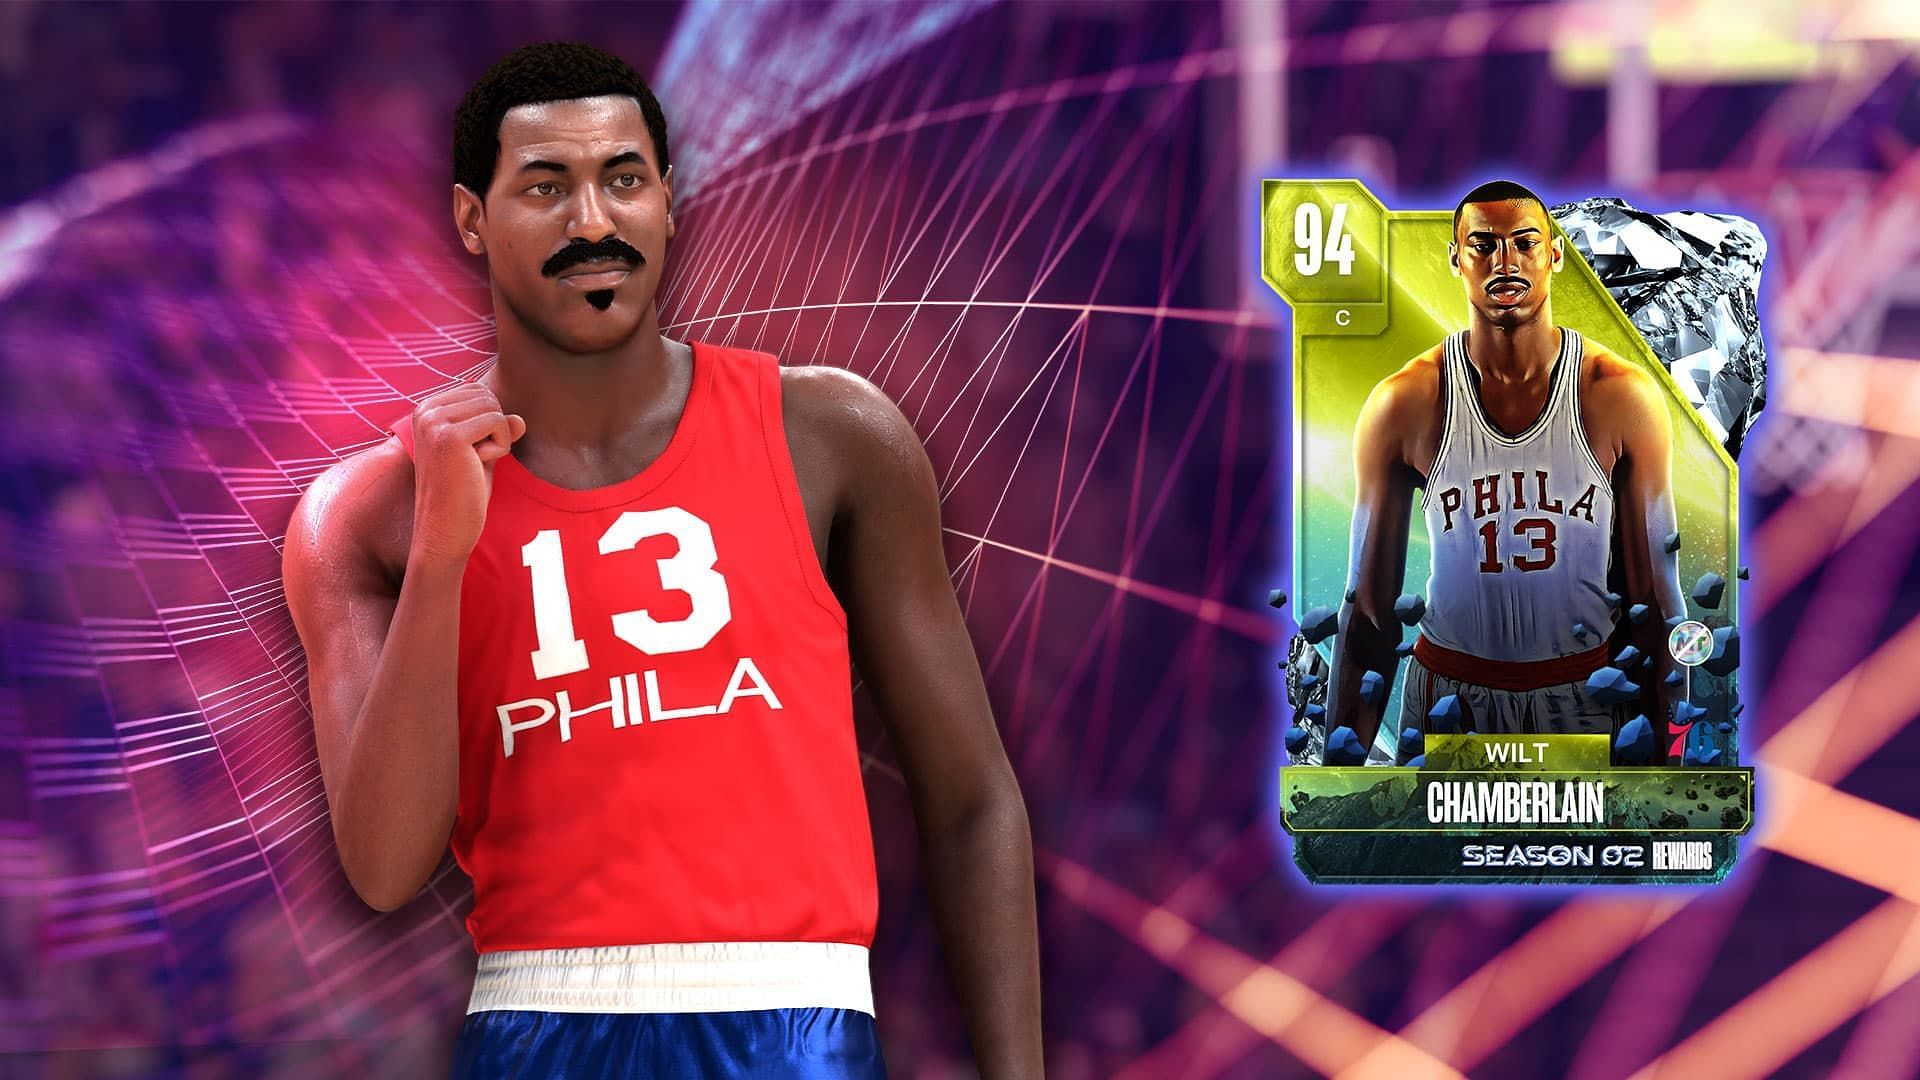 The special Wilt Chamberlain card (Image via 2K Games)